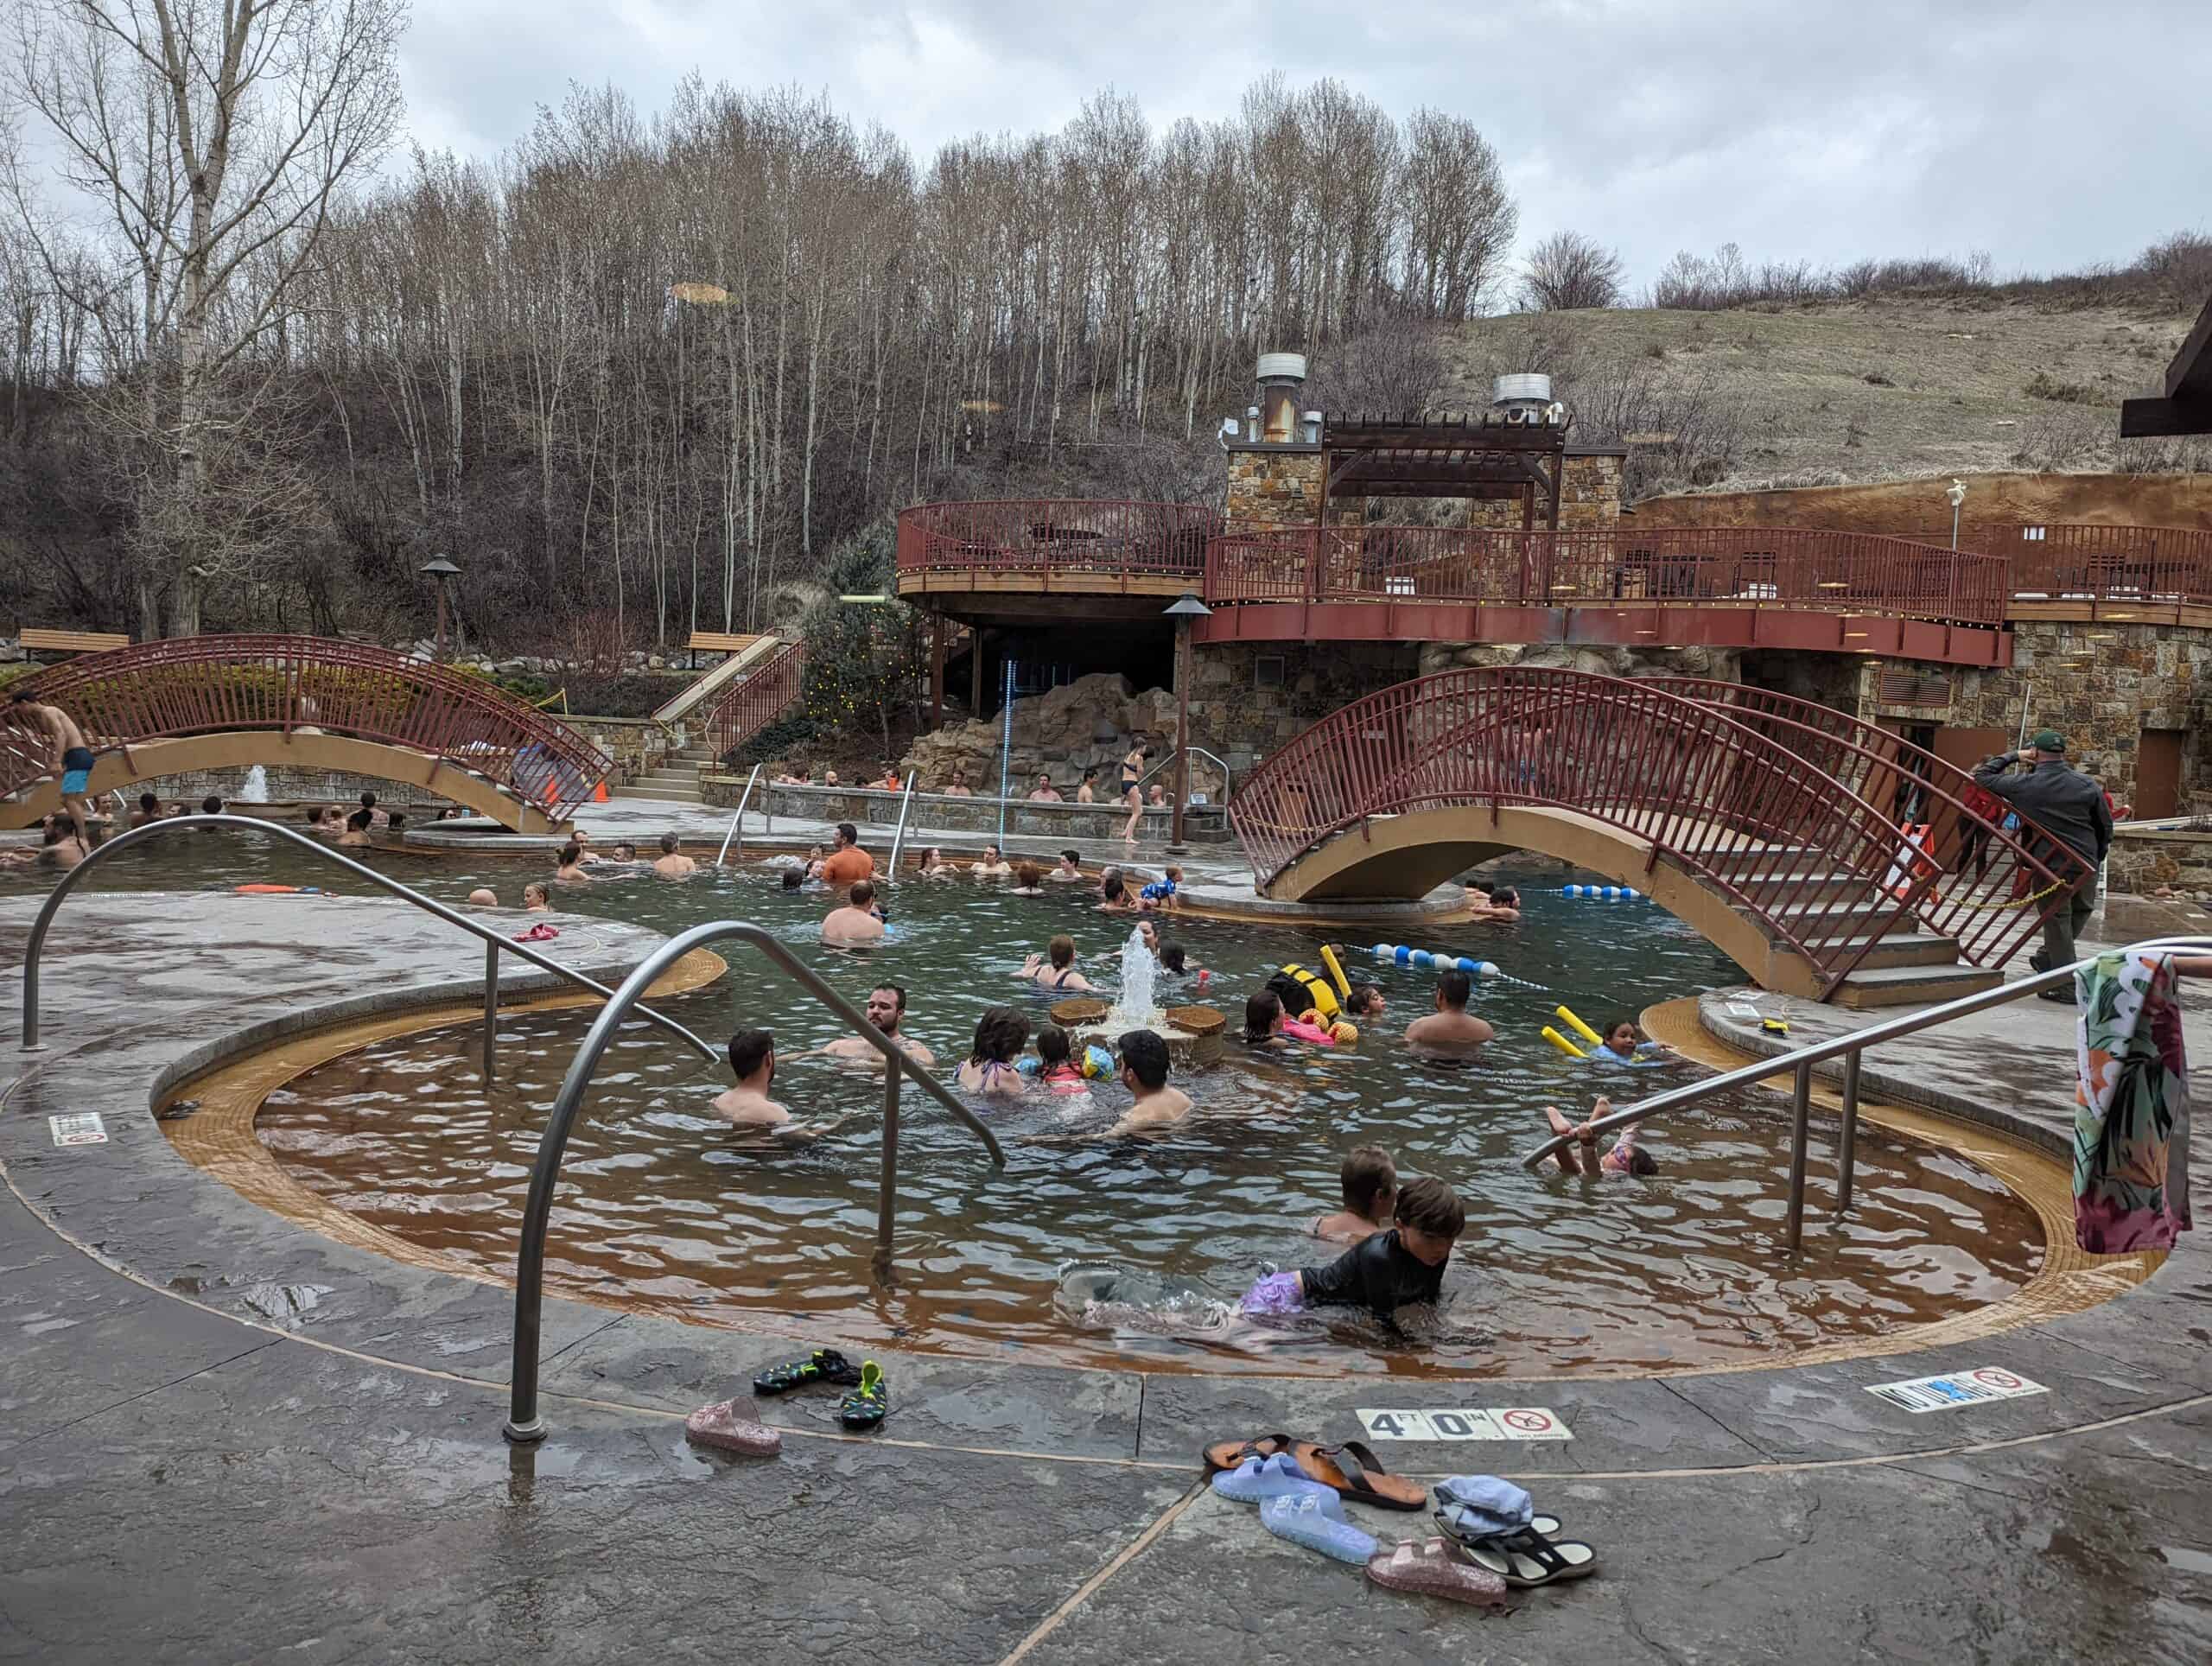 A picture of Old Town Hot Springs in Steamboat Springs, Colorado taken by me.